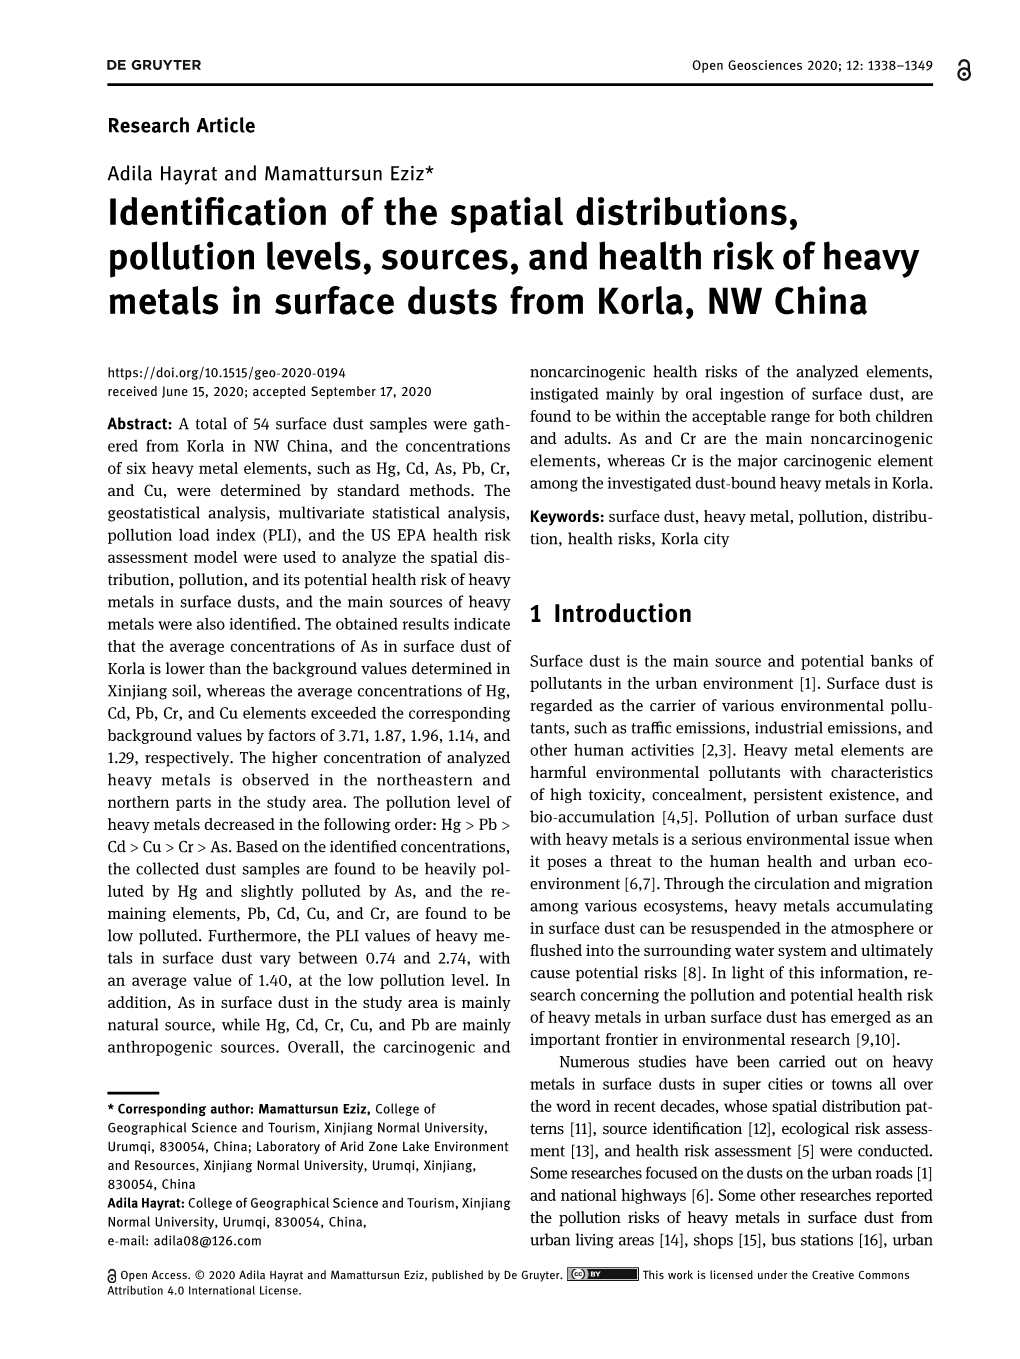 Identification of the Spatial Distributions, Pollution Levels